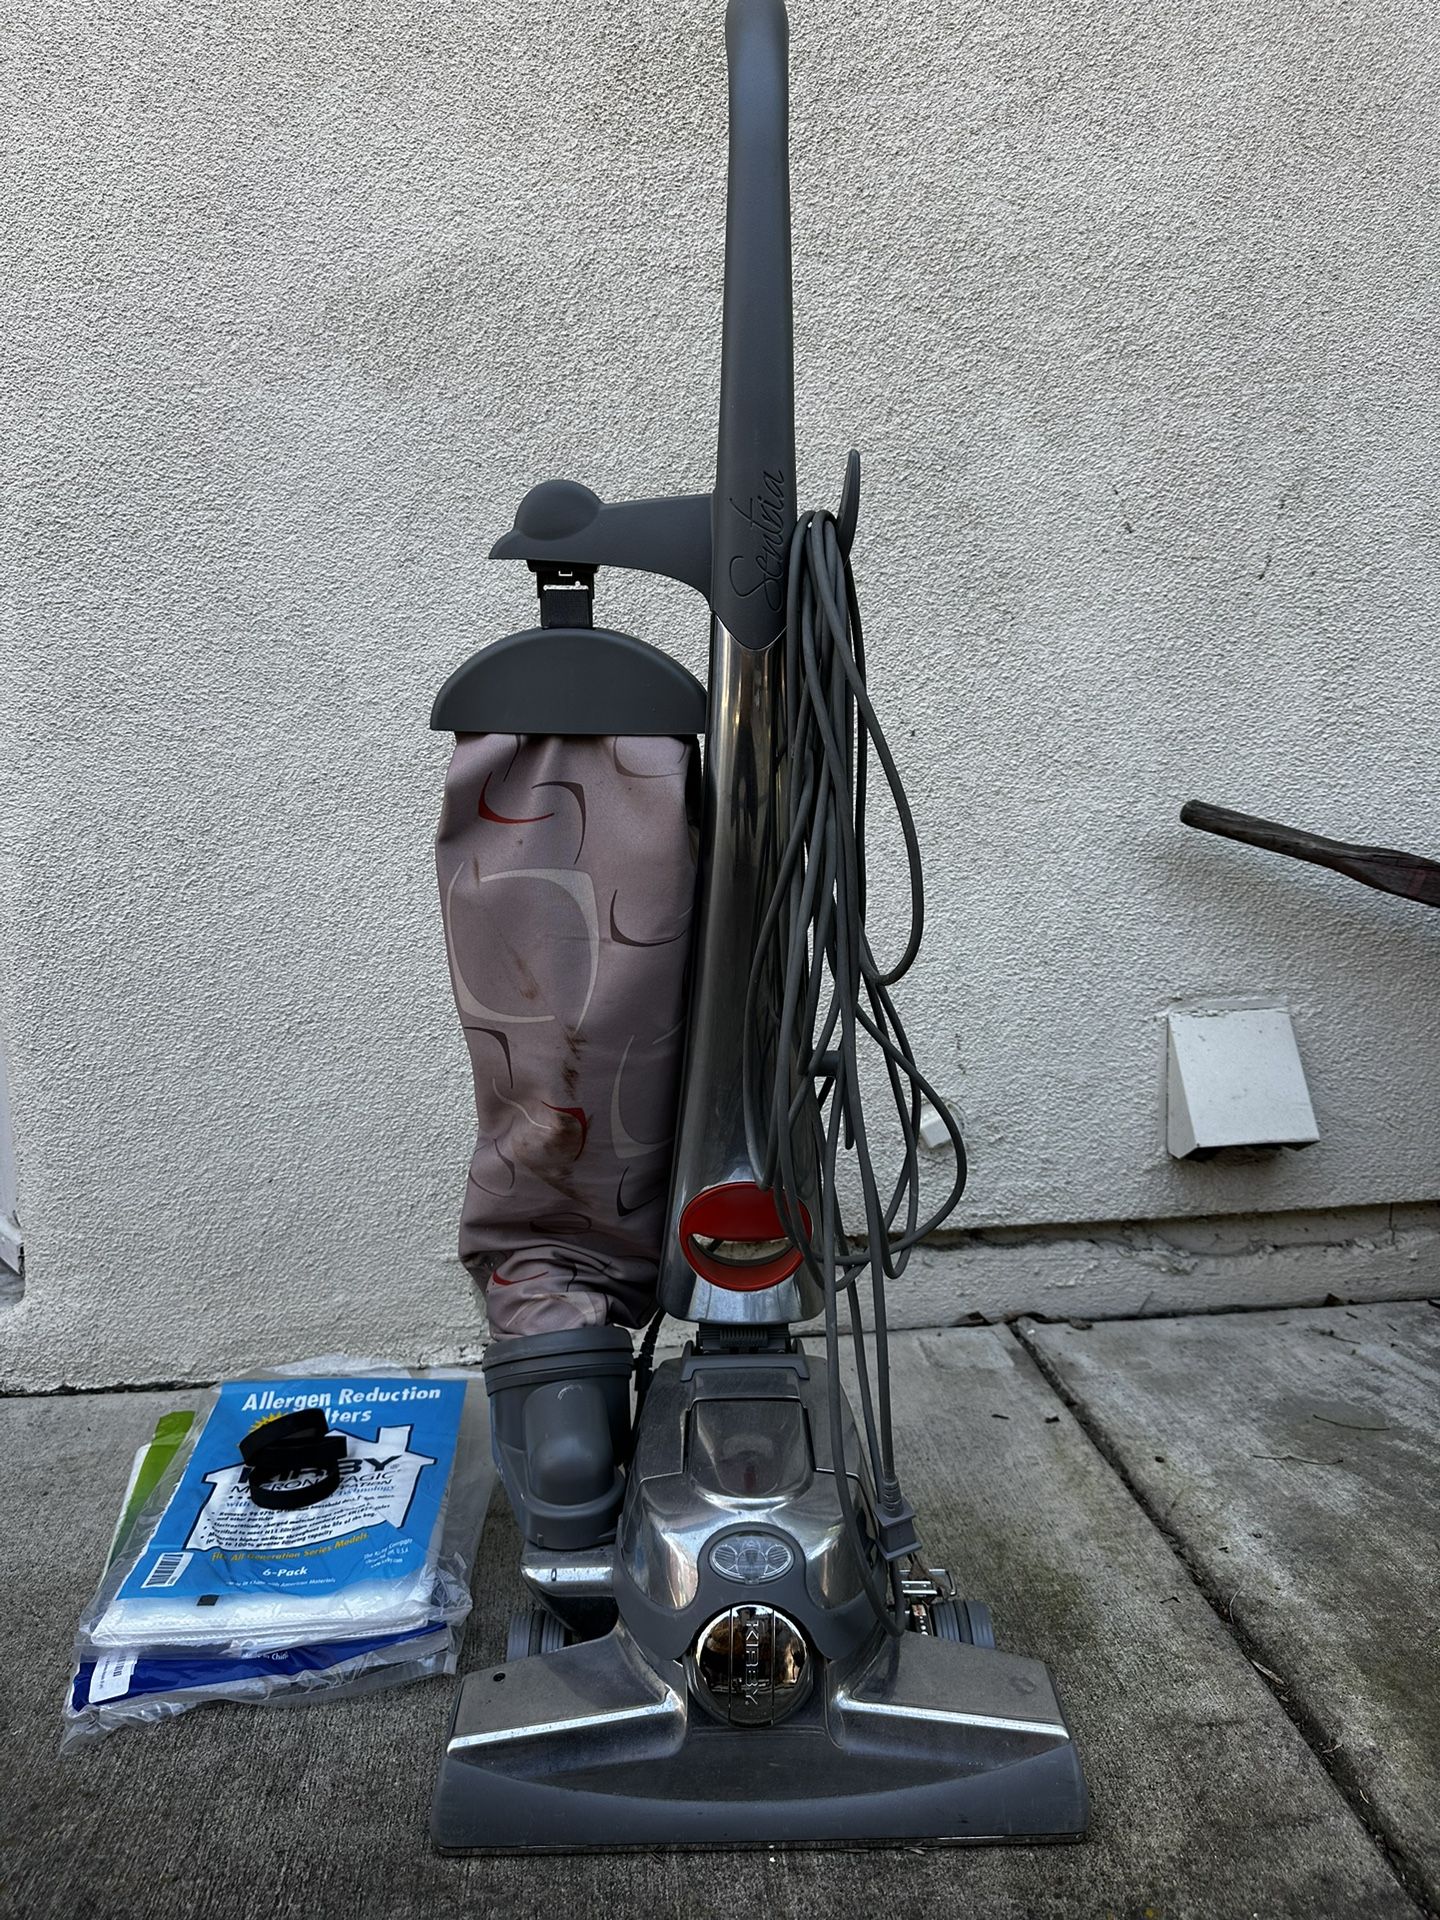 Kirby Sentria Vacuum, 6 Bags, 3 Belts, Vacuum Not Working, For Parts 